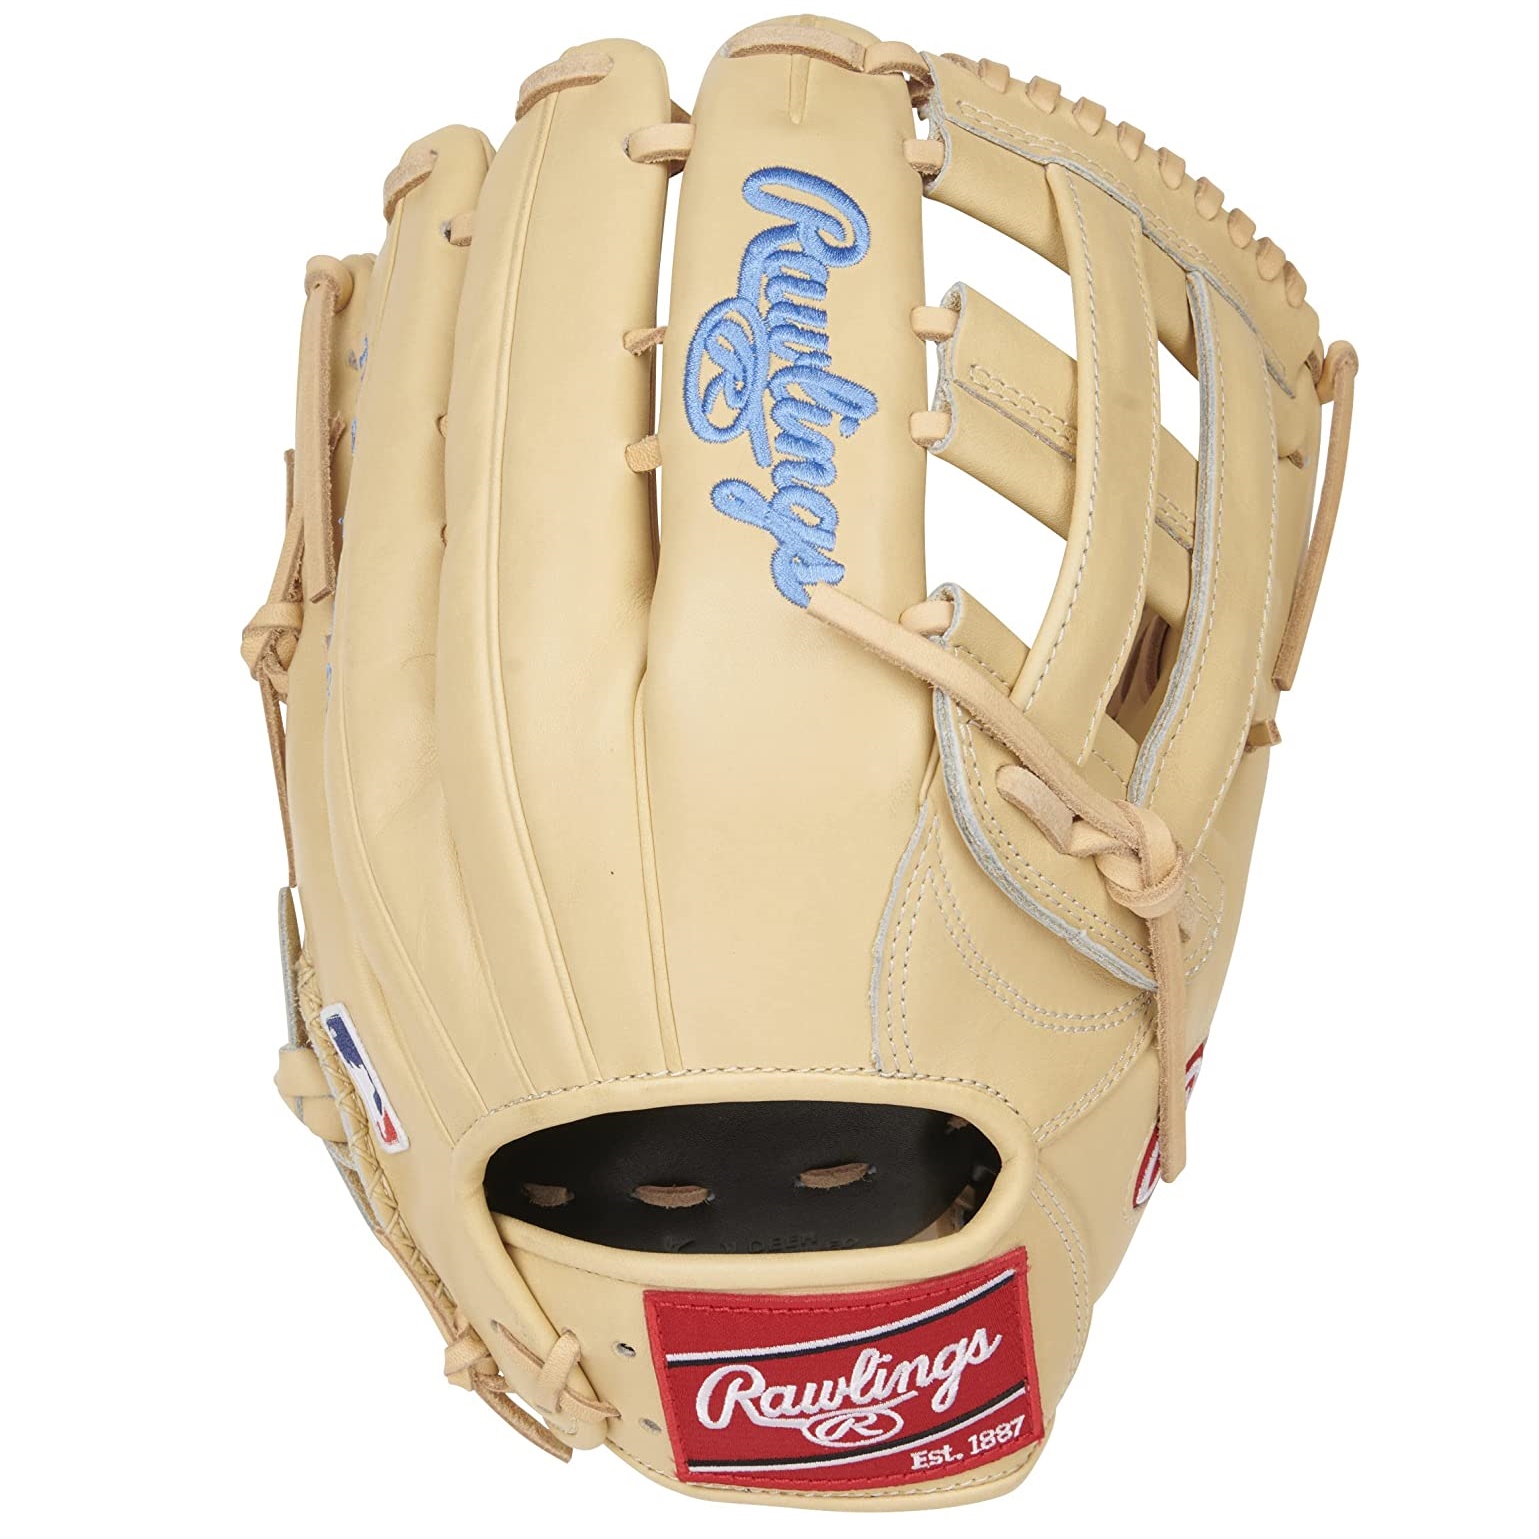 rawlings-heart-of-the-hide-13-inch-baseball-glove-pro-h-web-bh-right-hand-throw PROBH3C-RightHandThrow Rawlings  Constructed from Rawlings world-renowned Heart of the Hide steer leather. Taken